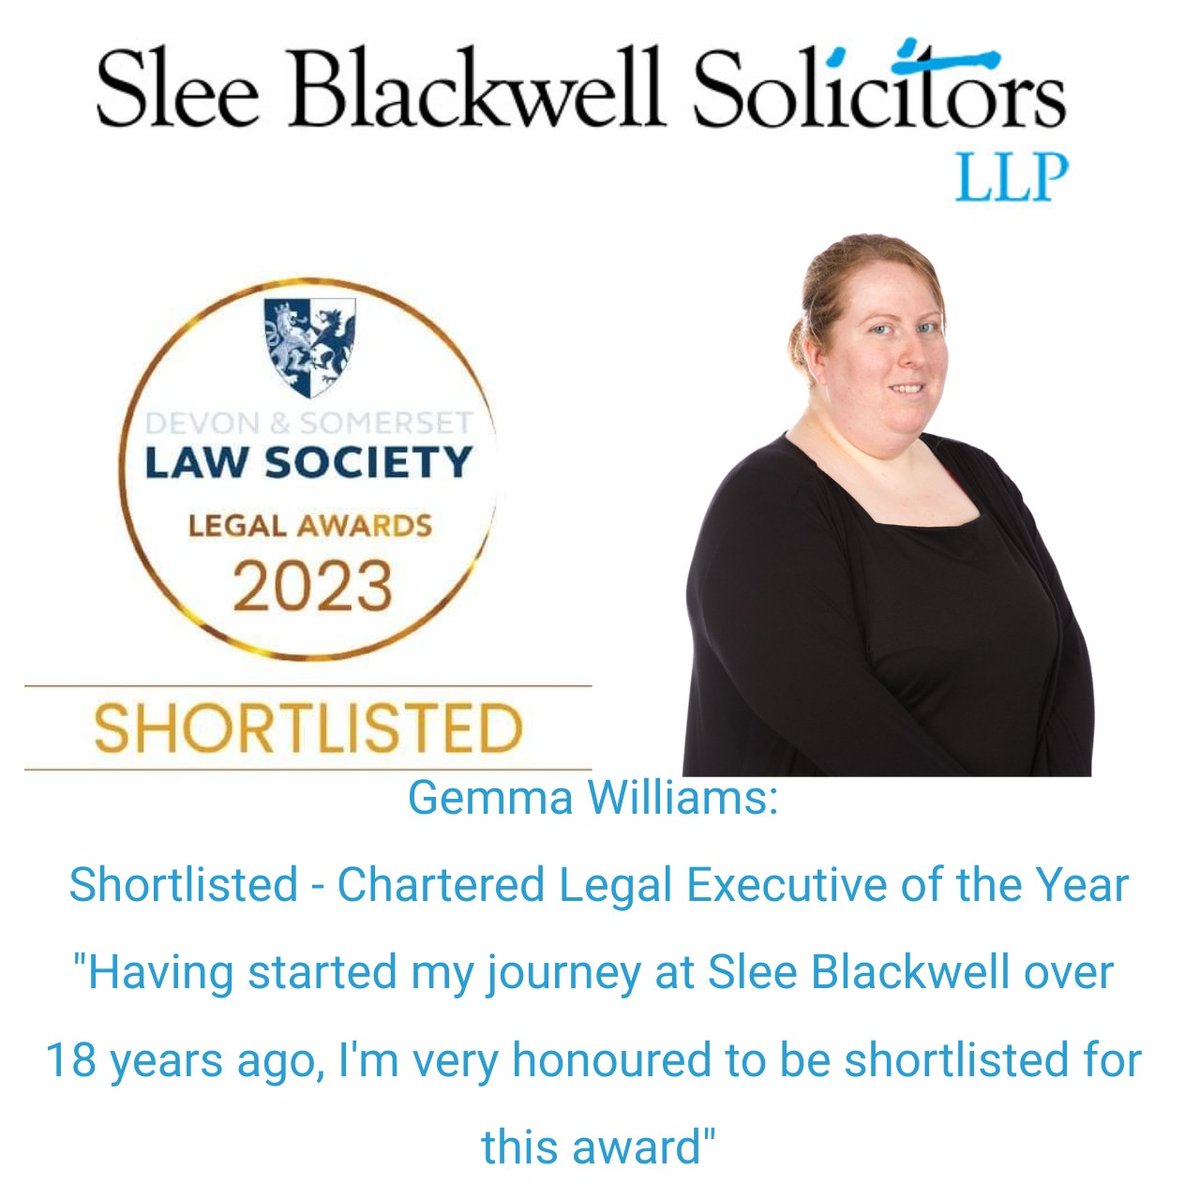 Gemma Williams has been shortlisted for the Devon & Somerset Law Society Awards. Gemma deals with all aspects of residential conveyancing helping clients across England and Wales.
#awards
#dasls
#shortlisted